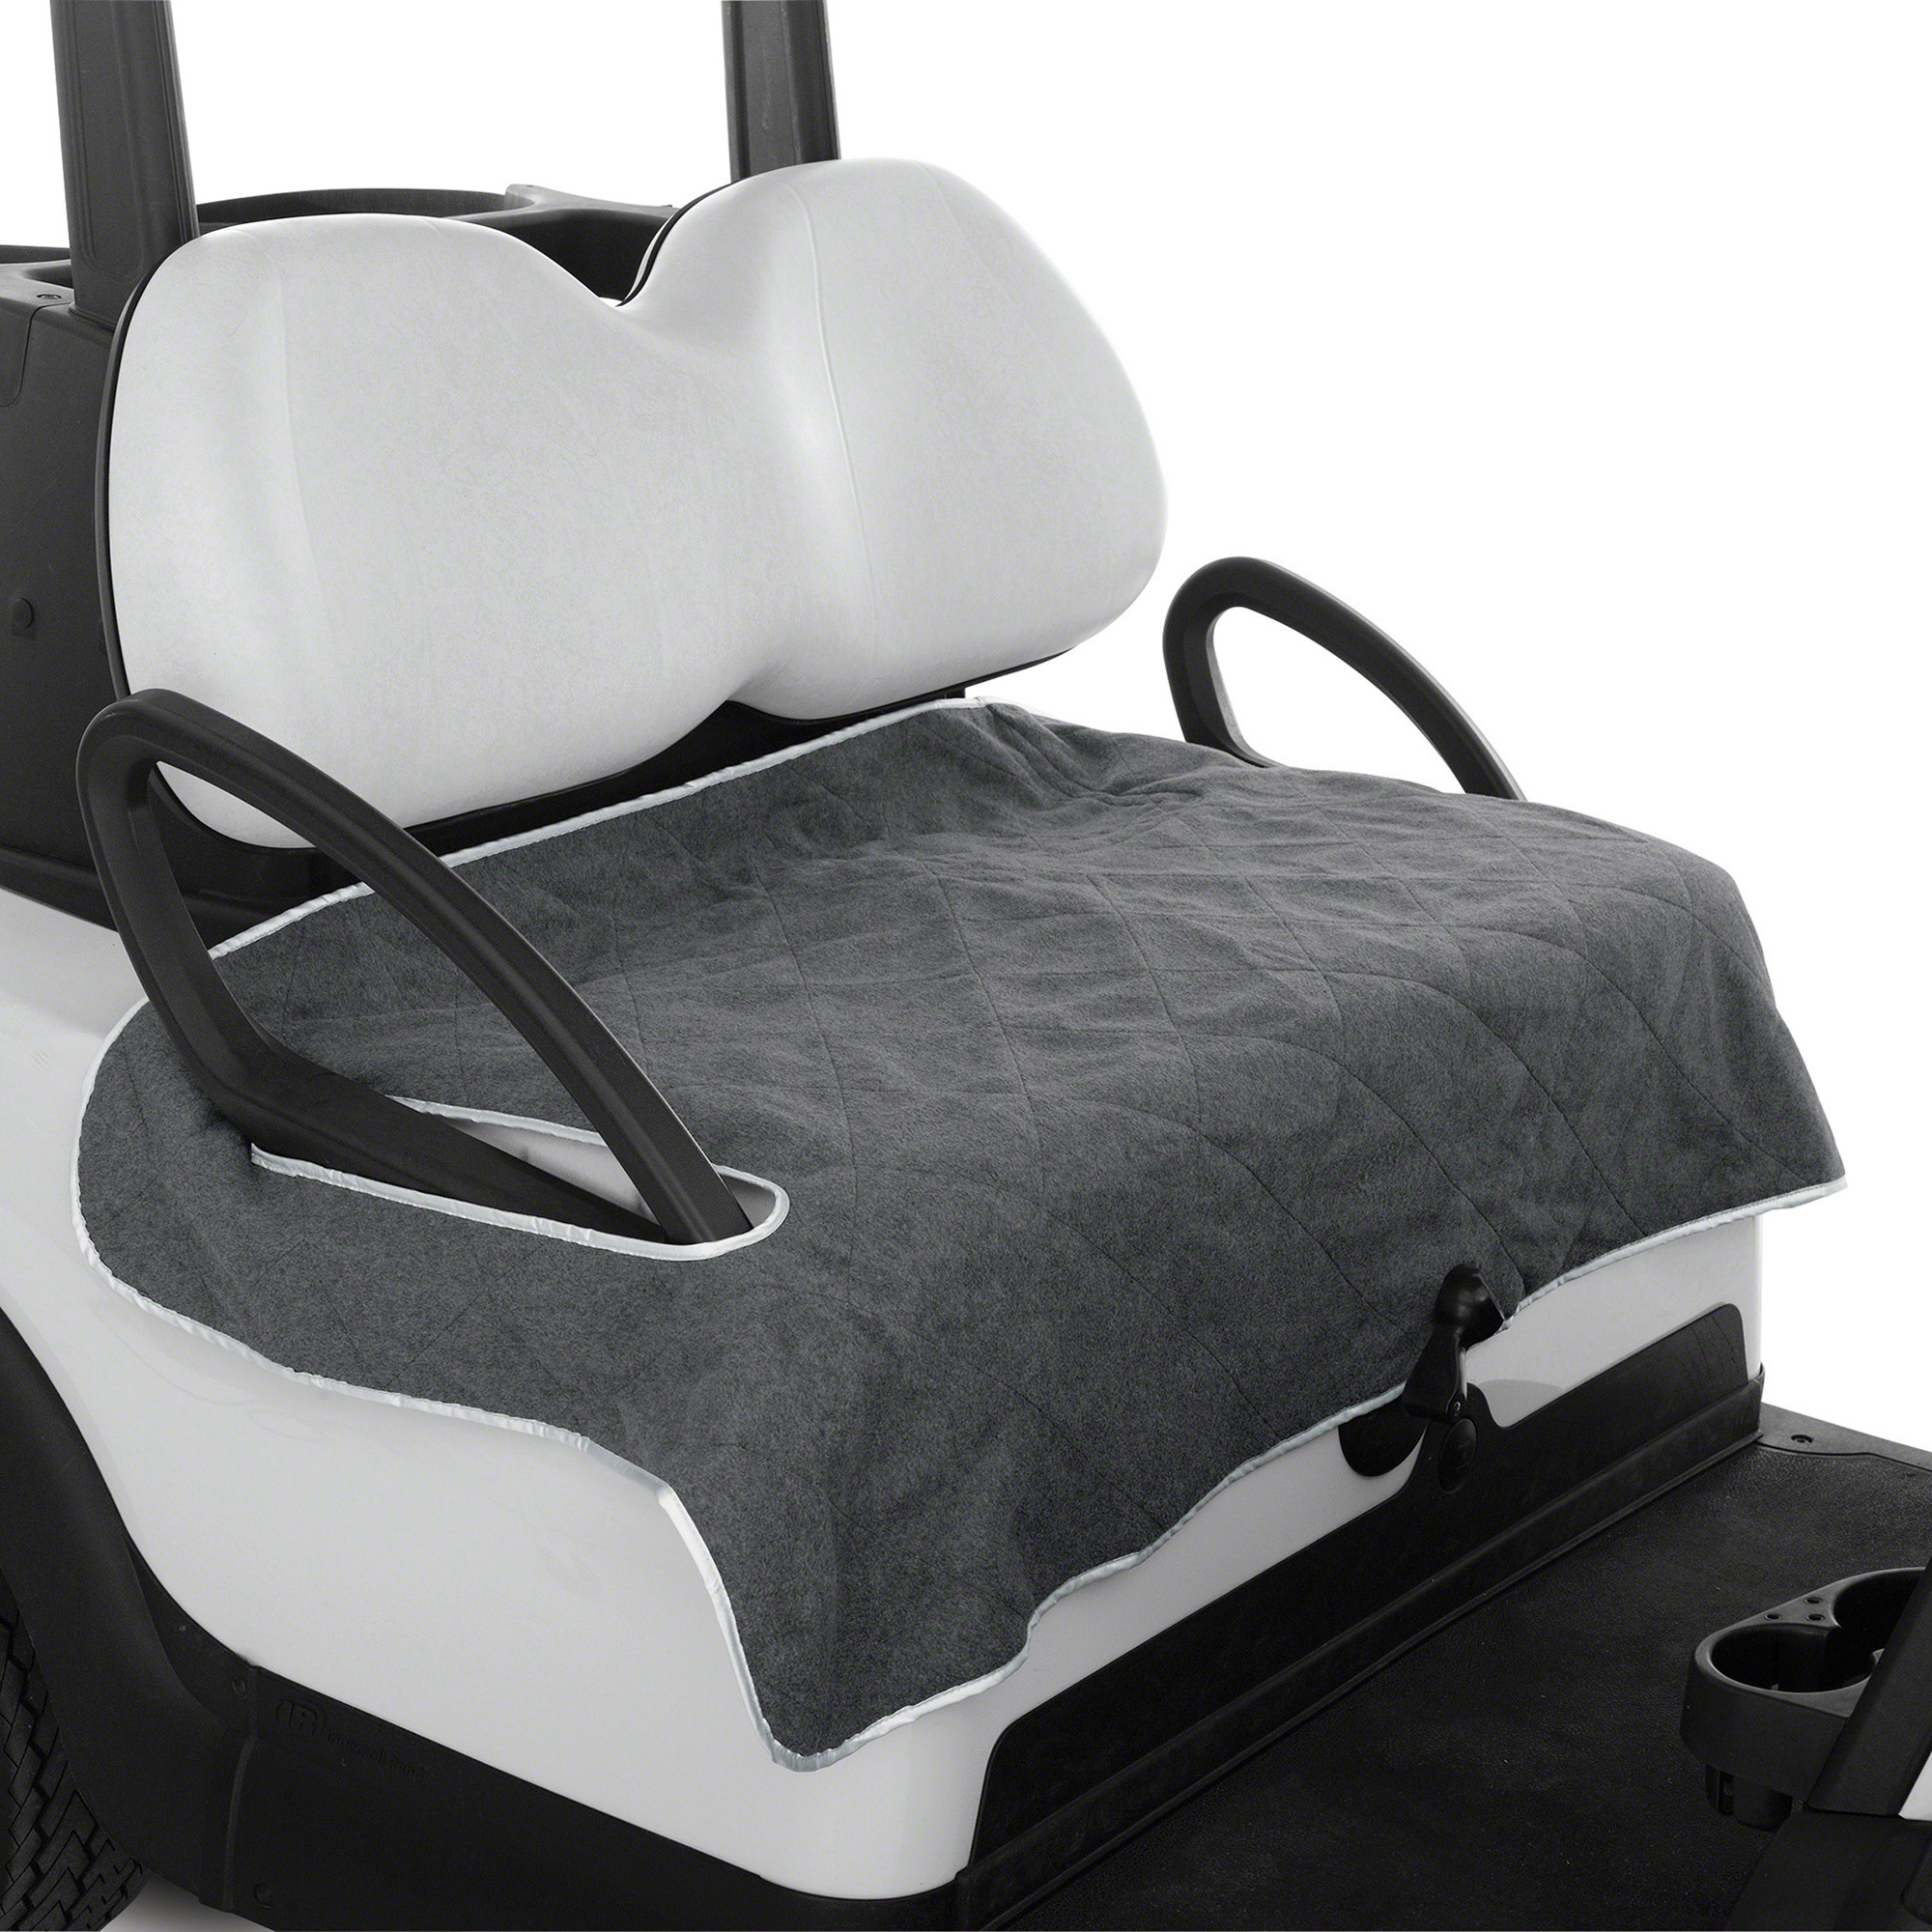 Classic Accessories Fairway Golf Car Seat Cover Terry Cloth, Navy